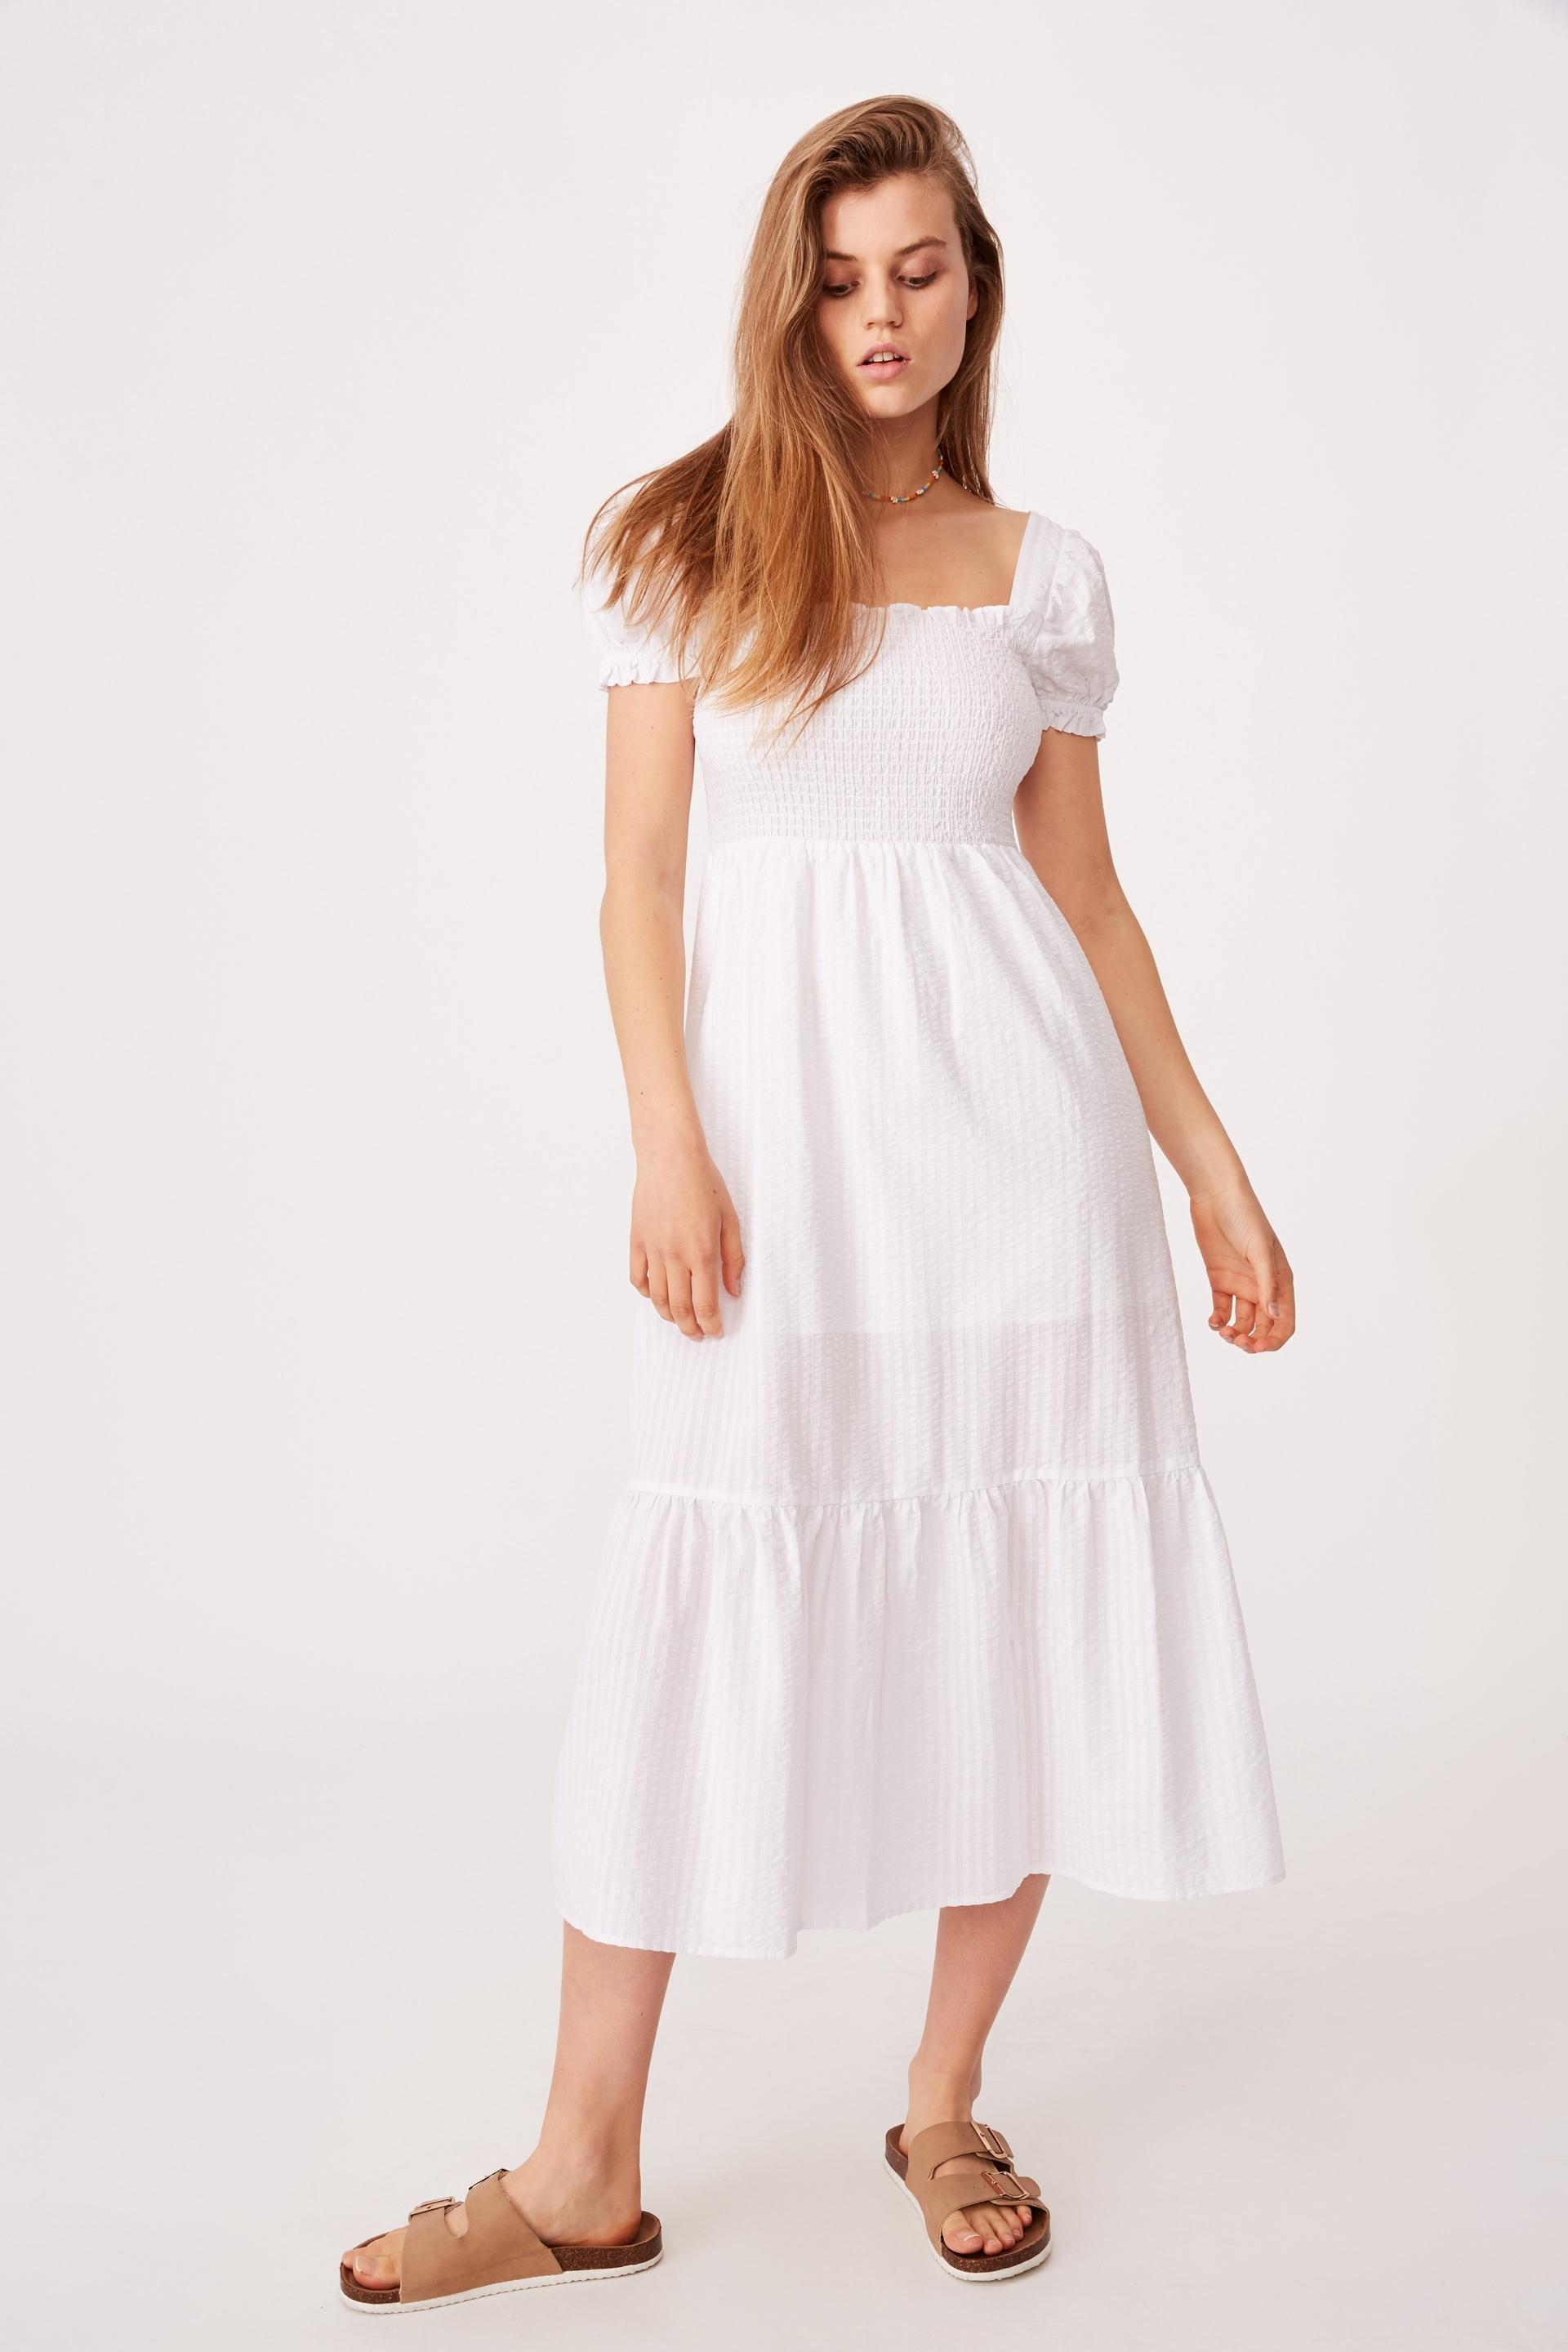 Woven louise shirred maxi dress - white gingham Cotton On Casual ...